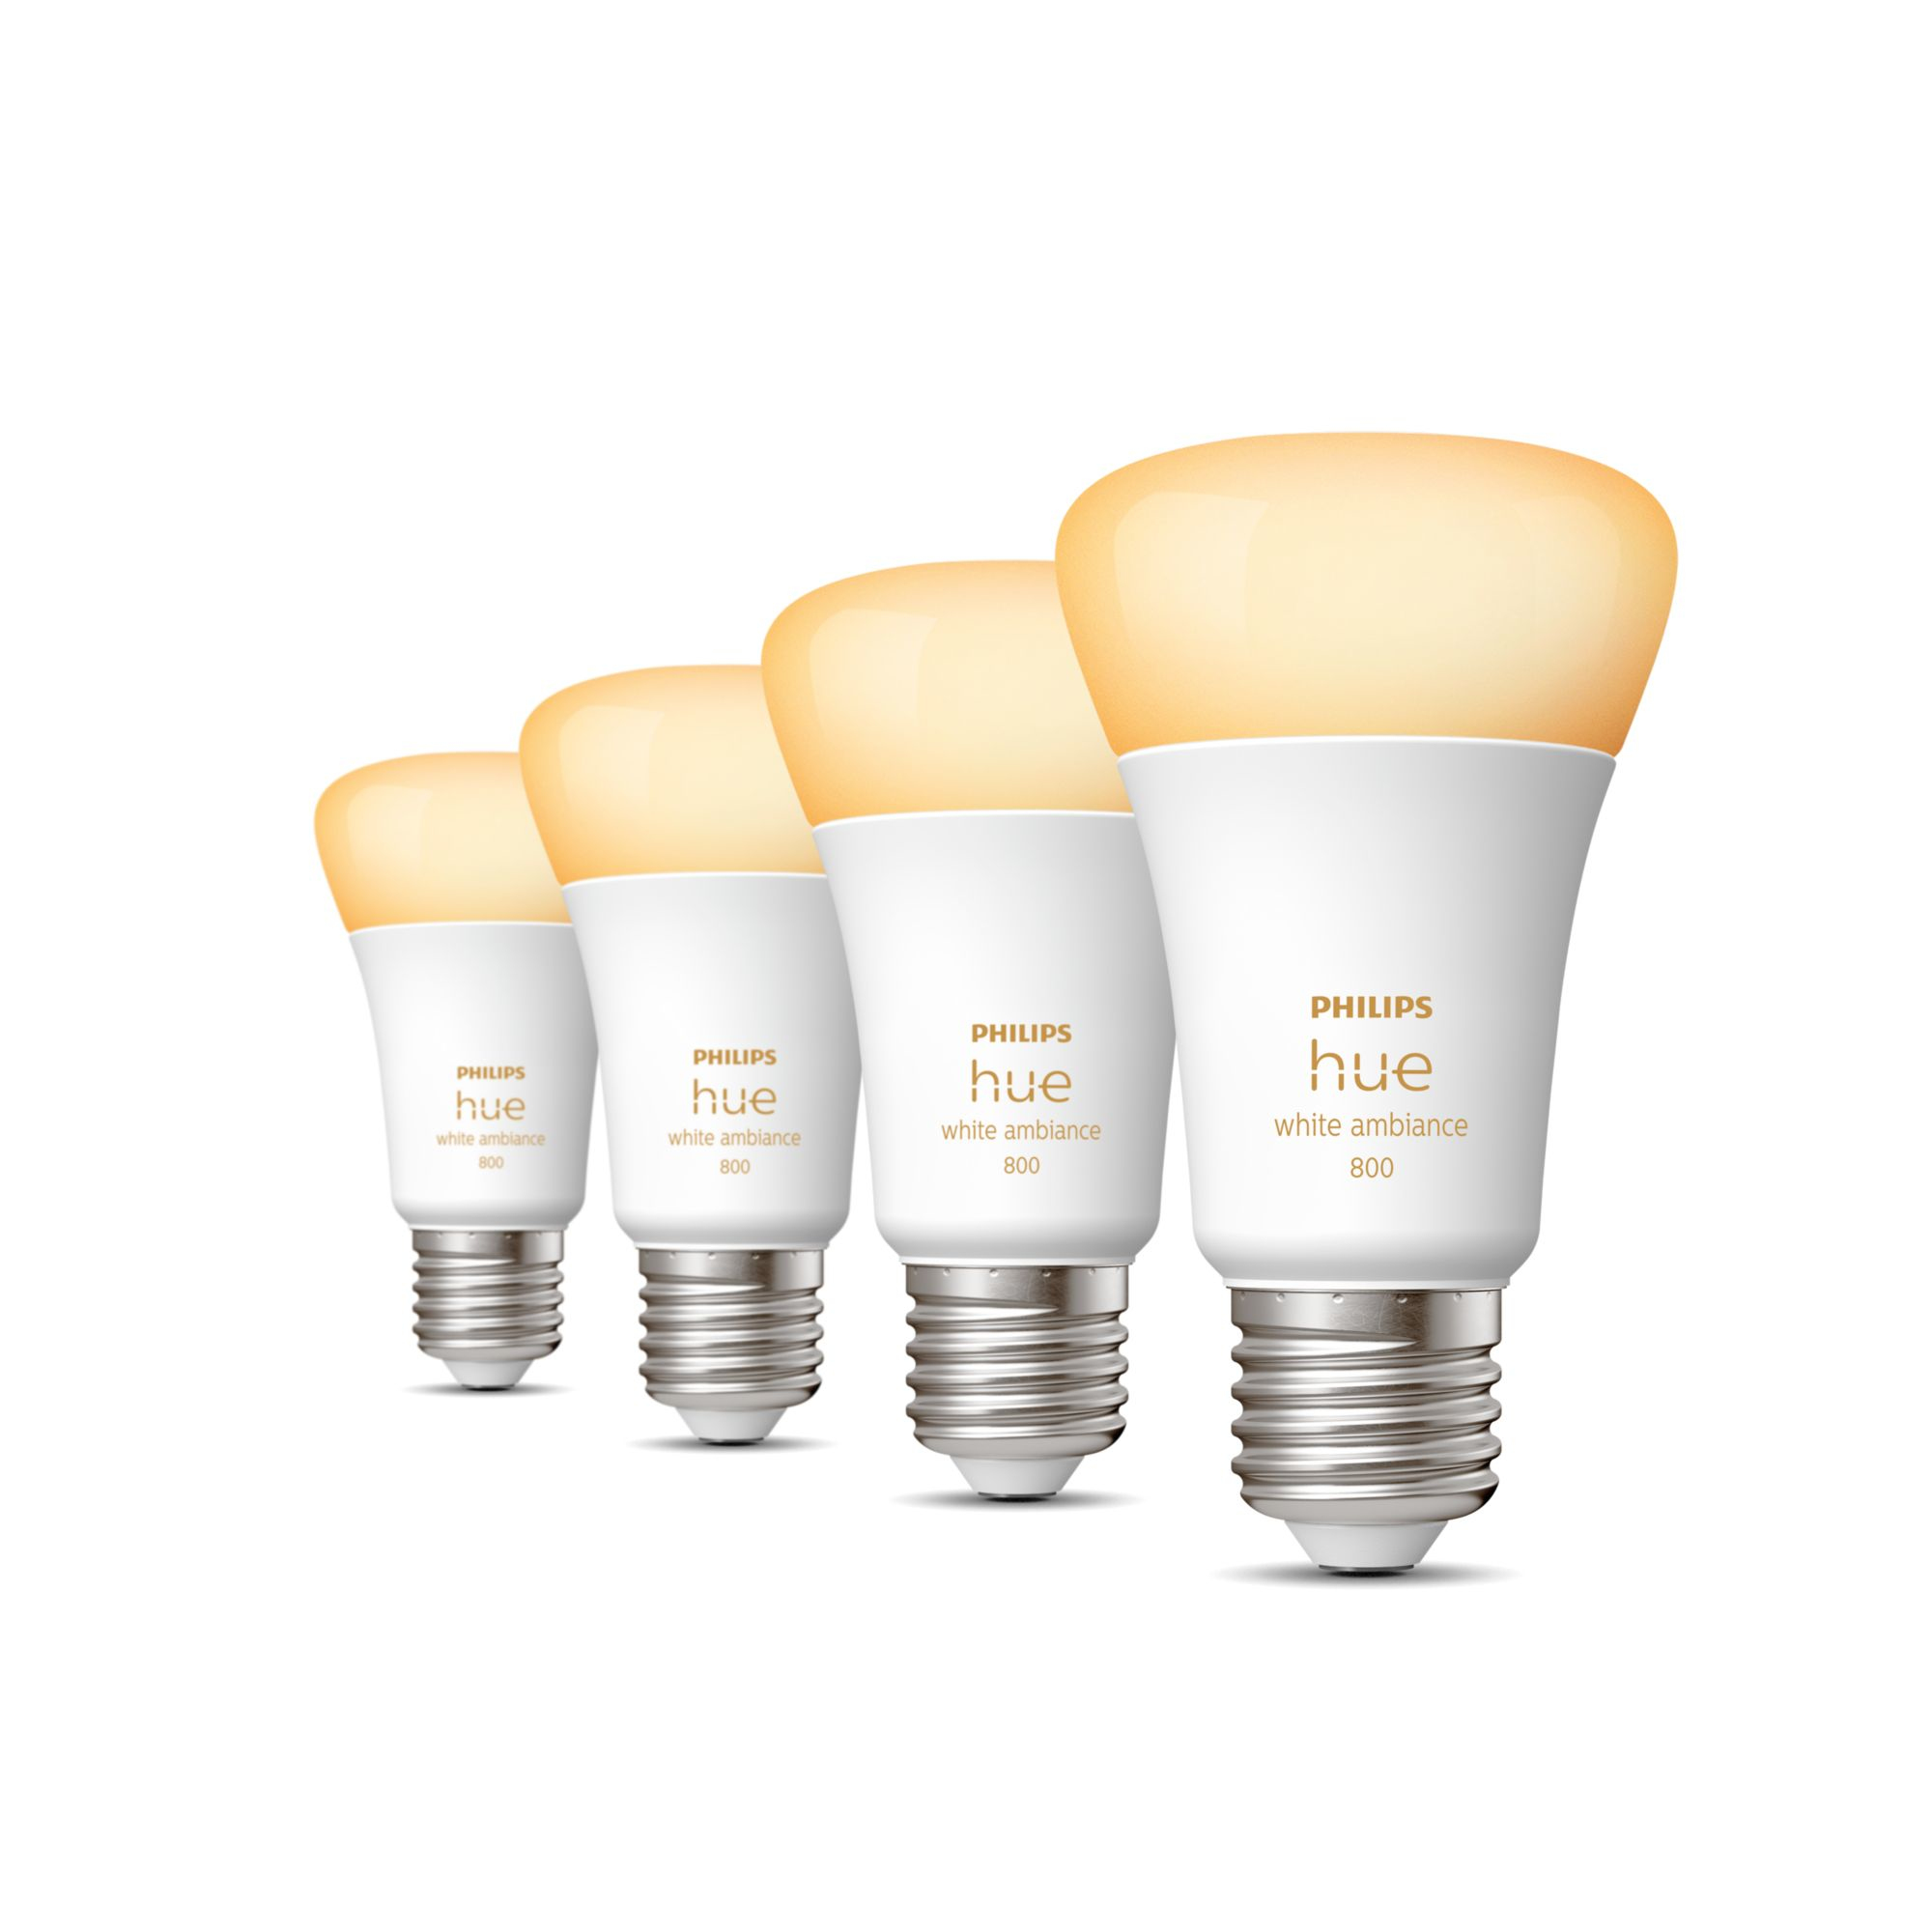 Philips by Signify A60 - E27 slimme lamp - 800 (4-pack)